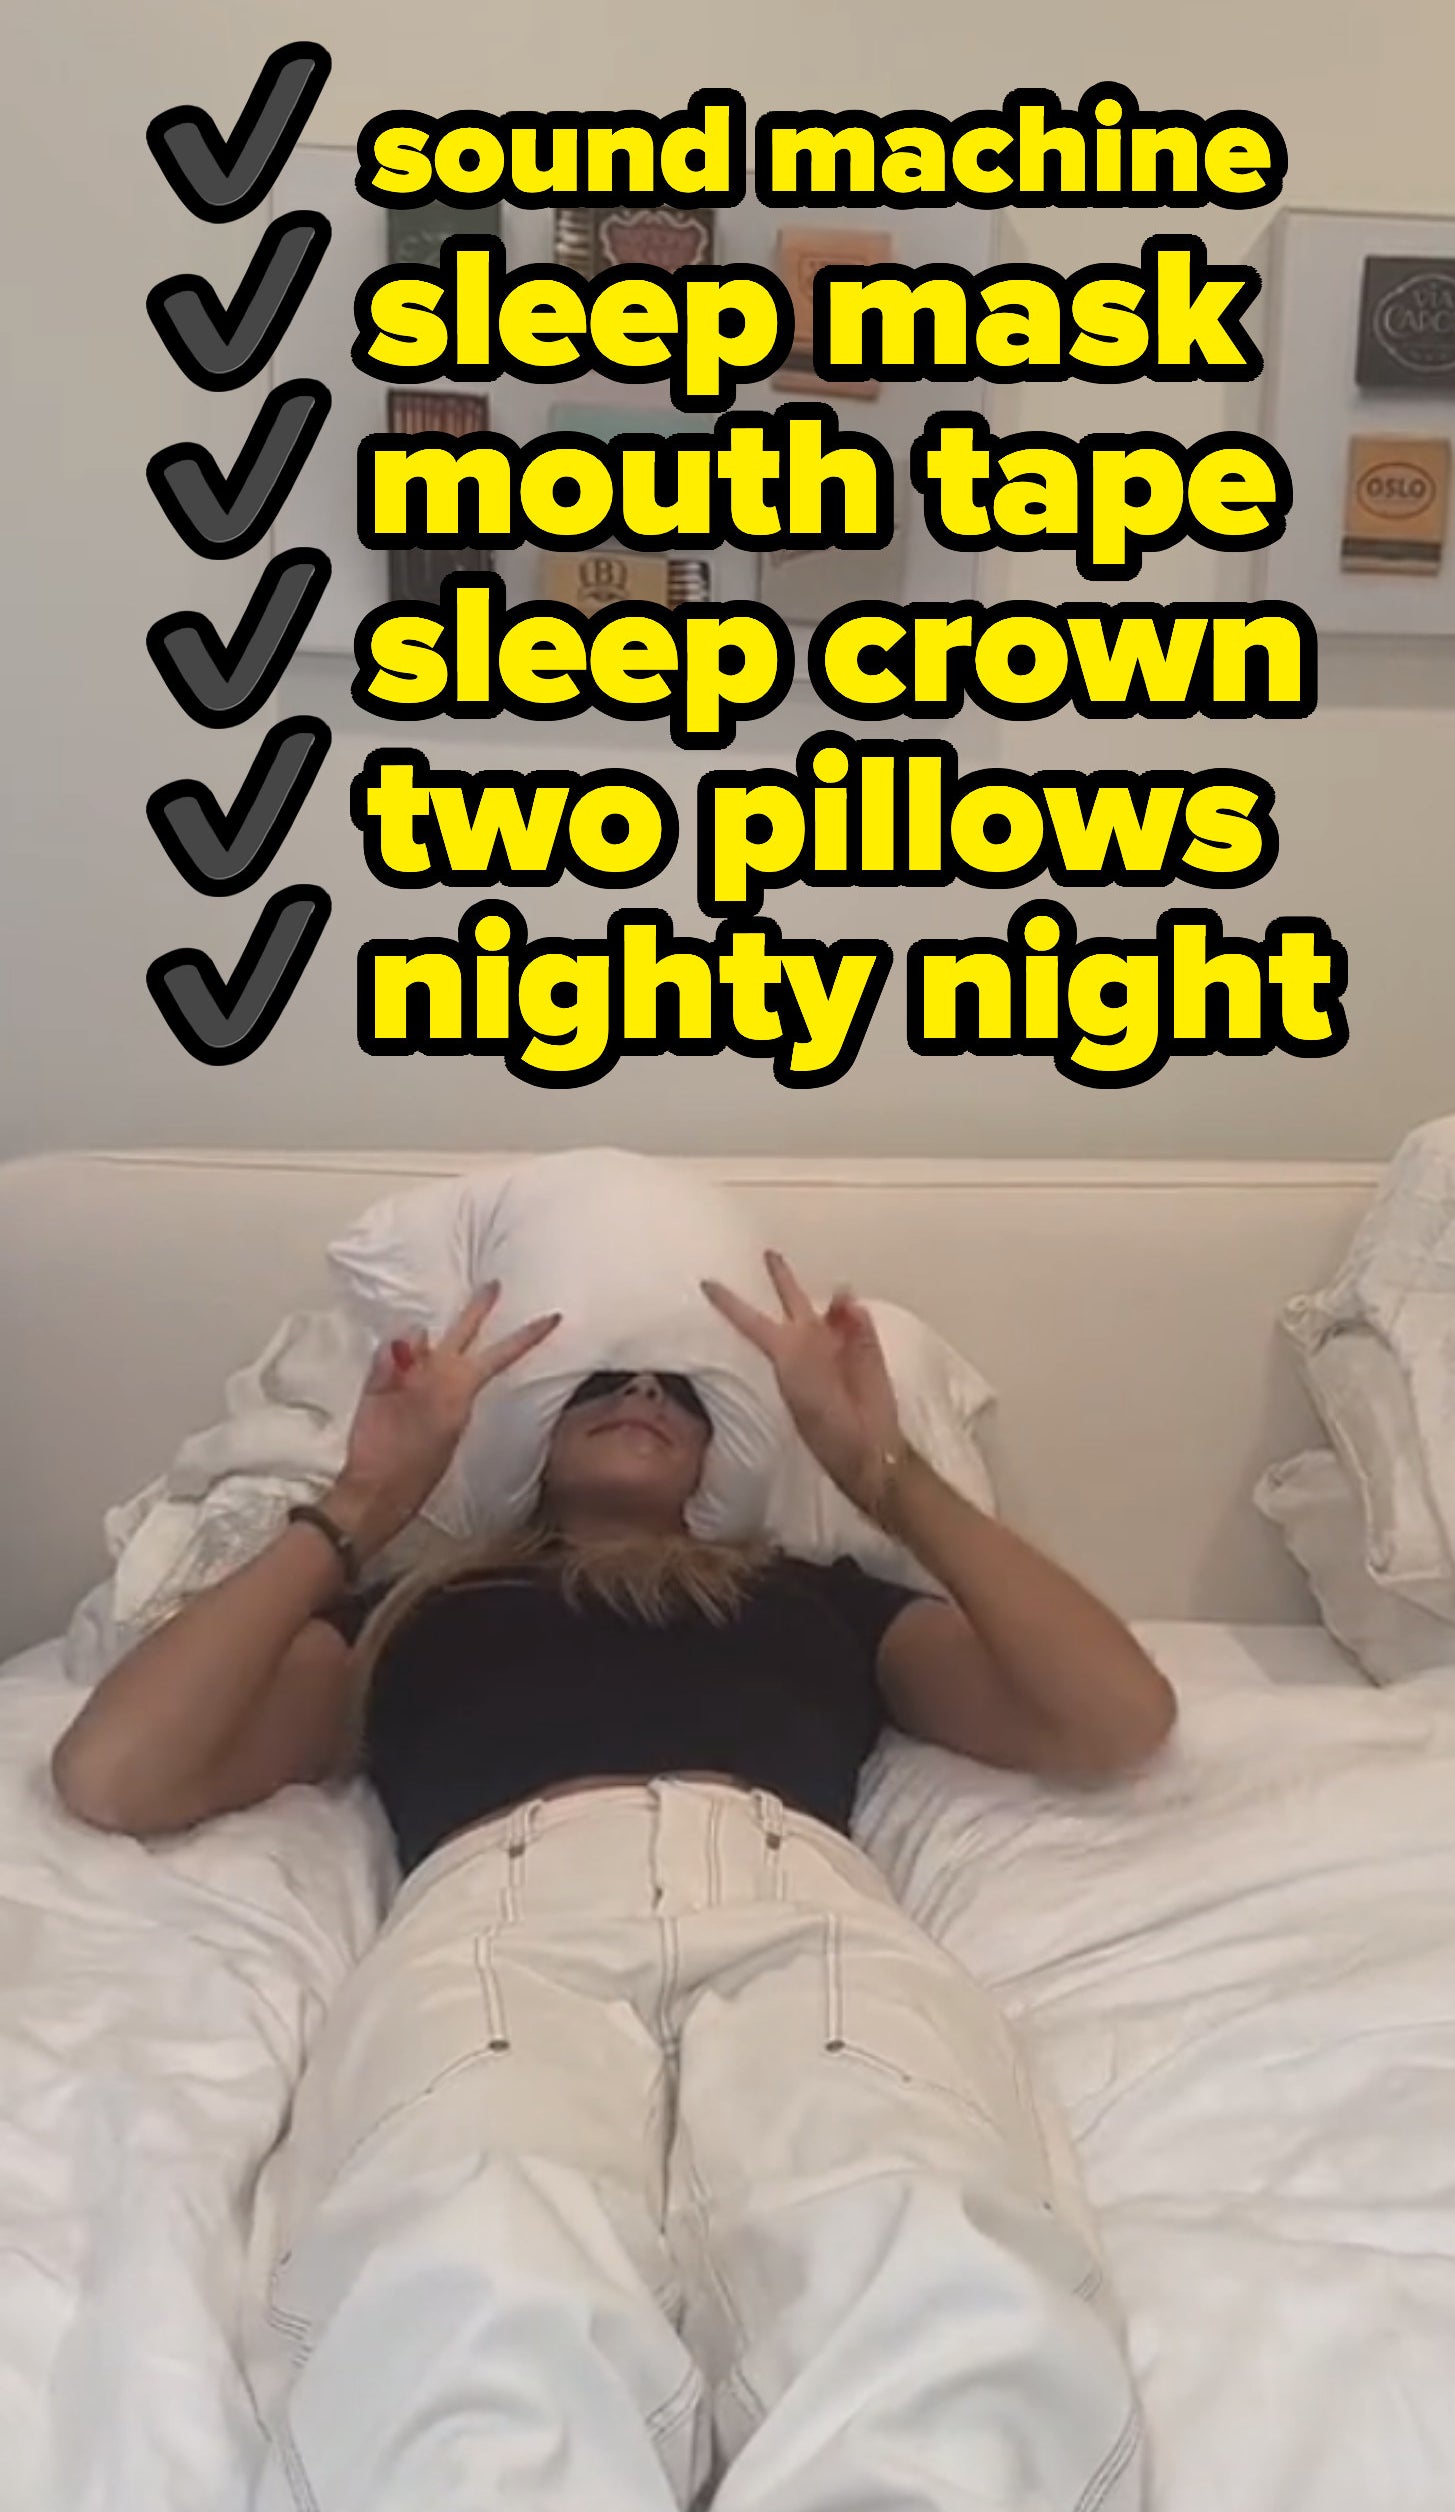 woman laying down with text that says &quot;sound machine, sleep mark, sleep crown, mouth tape, two pillows, nighty night&quot; with check marks beside each word